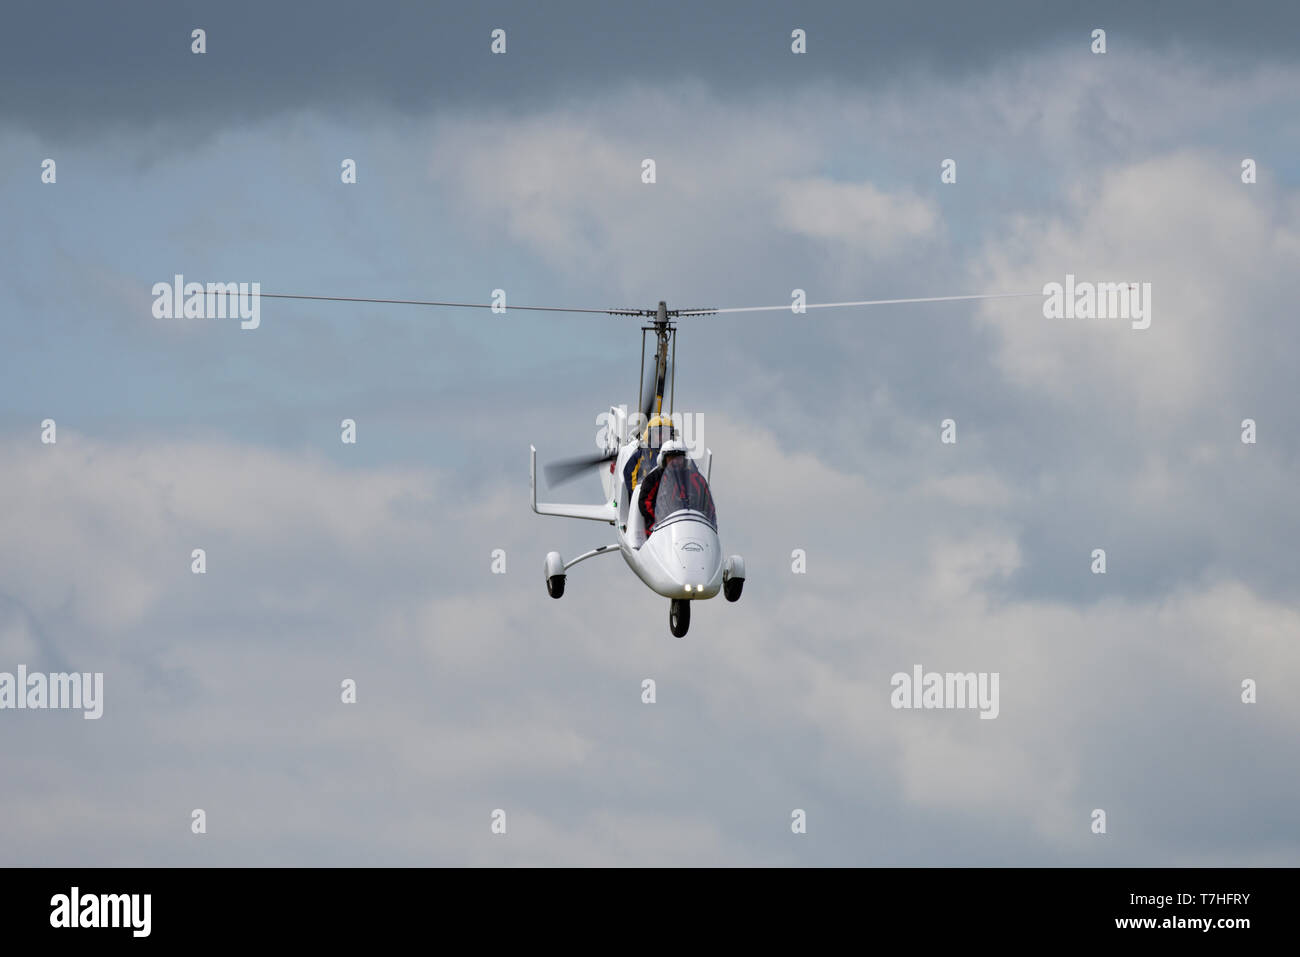 A Rotorsport gyrocopter G-CIRT descends for a landing at Popham Airfield in Hampshire at the Spring Fly-in event. Stock Photo